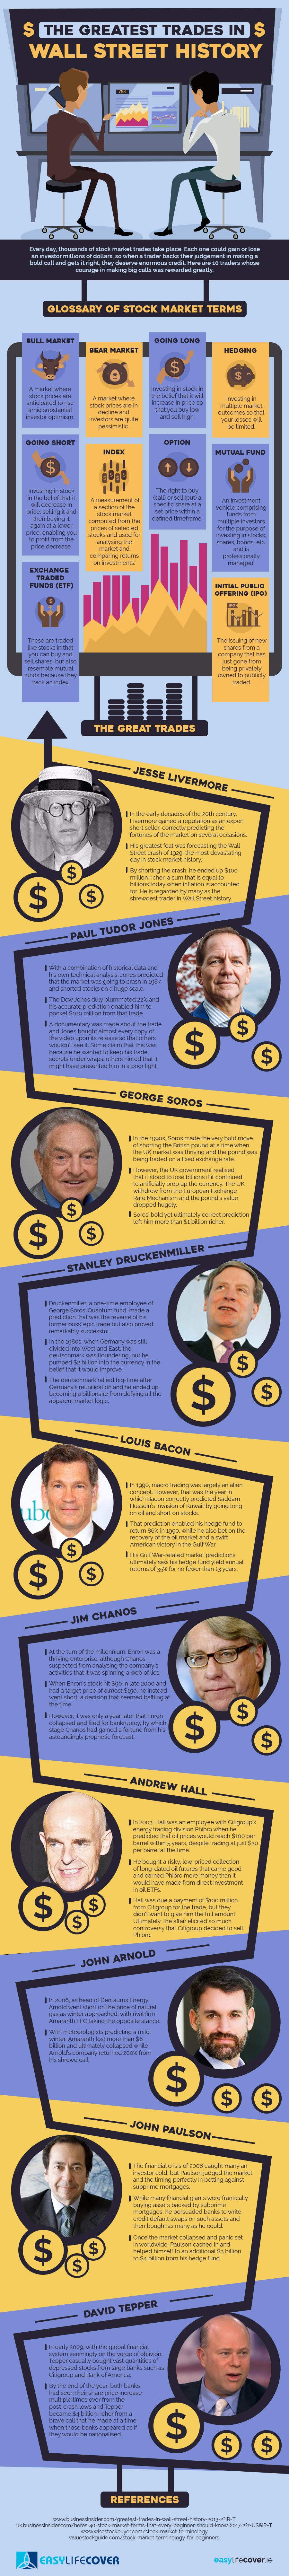 the greatest trades of wall street